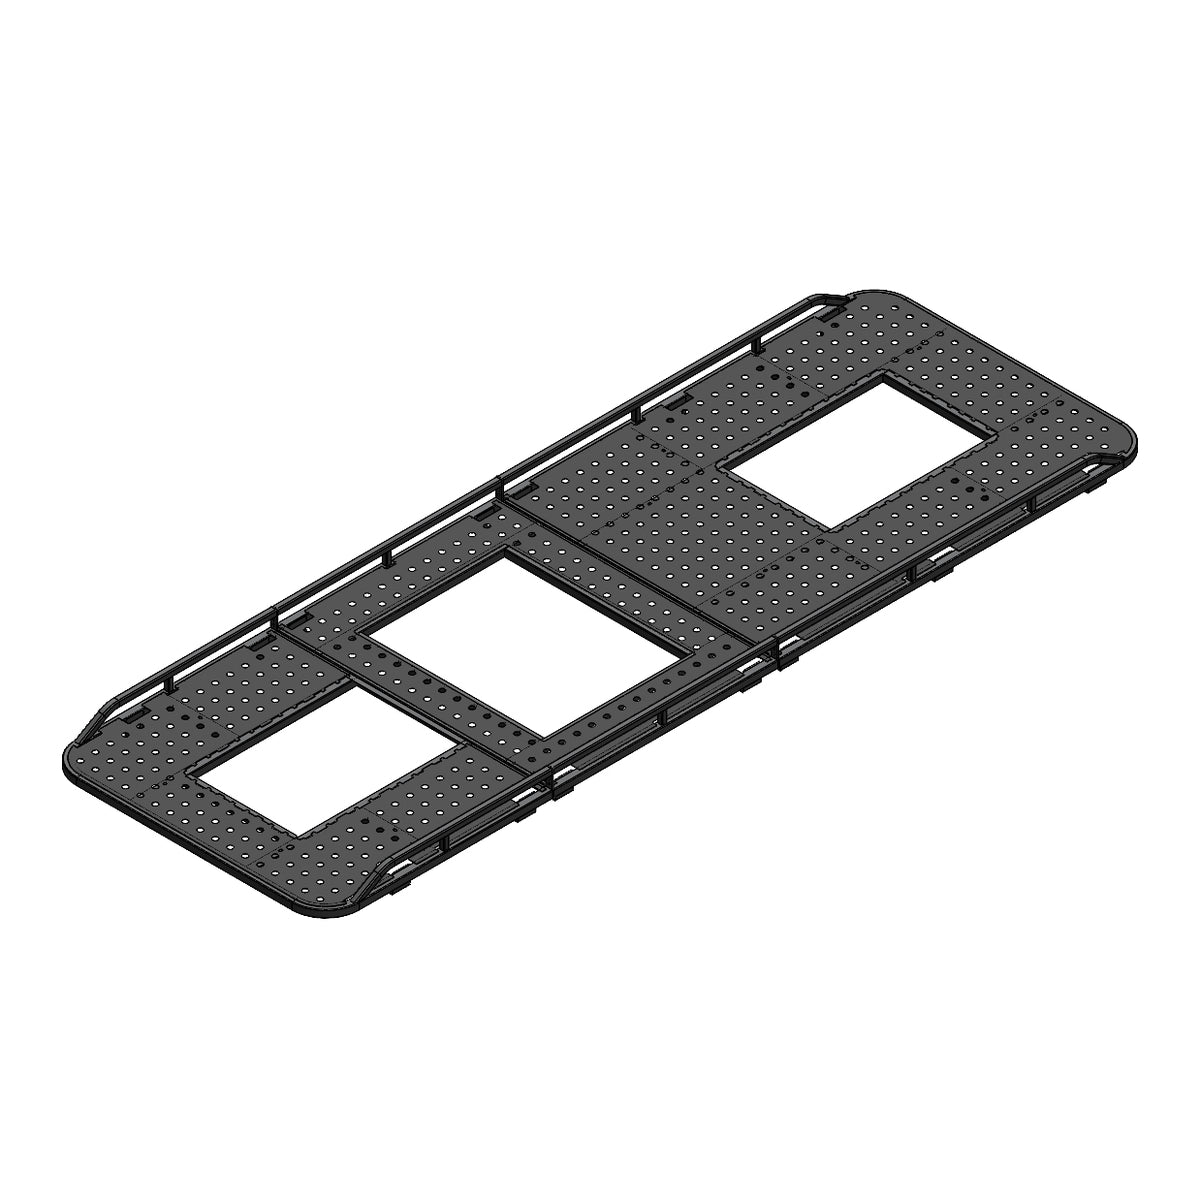 170 Roof Rack - 2/Vents for Dometic A/C